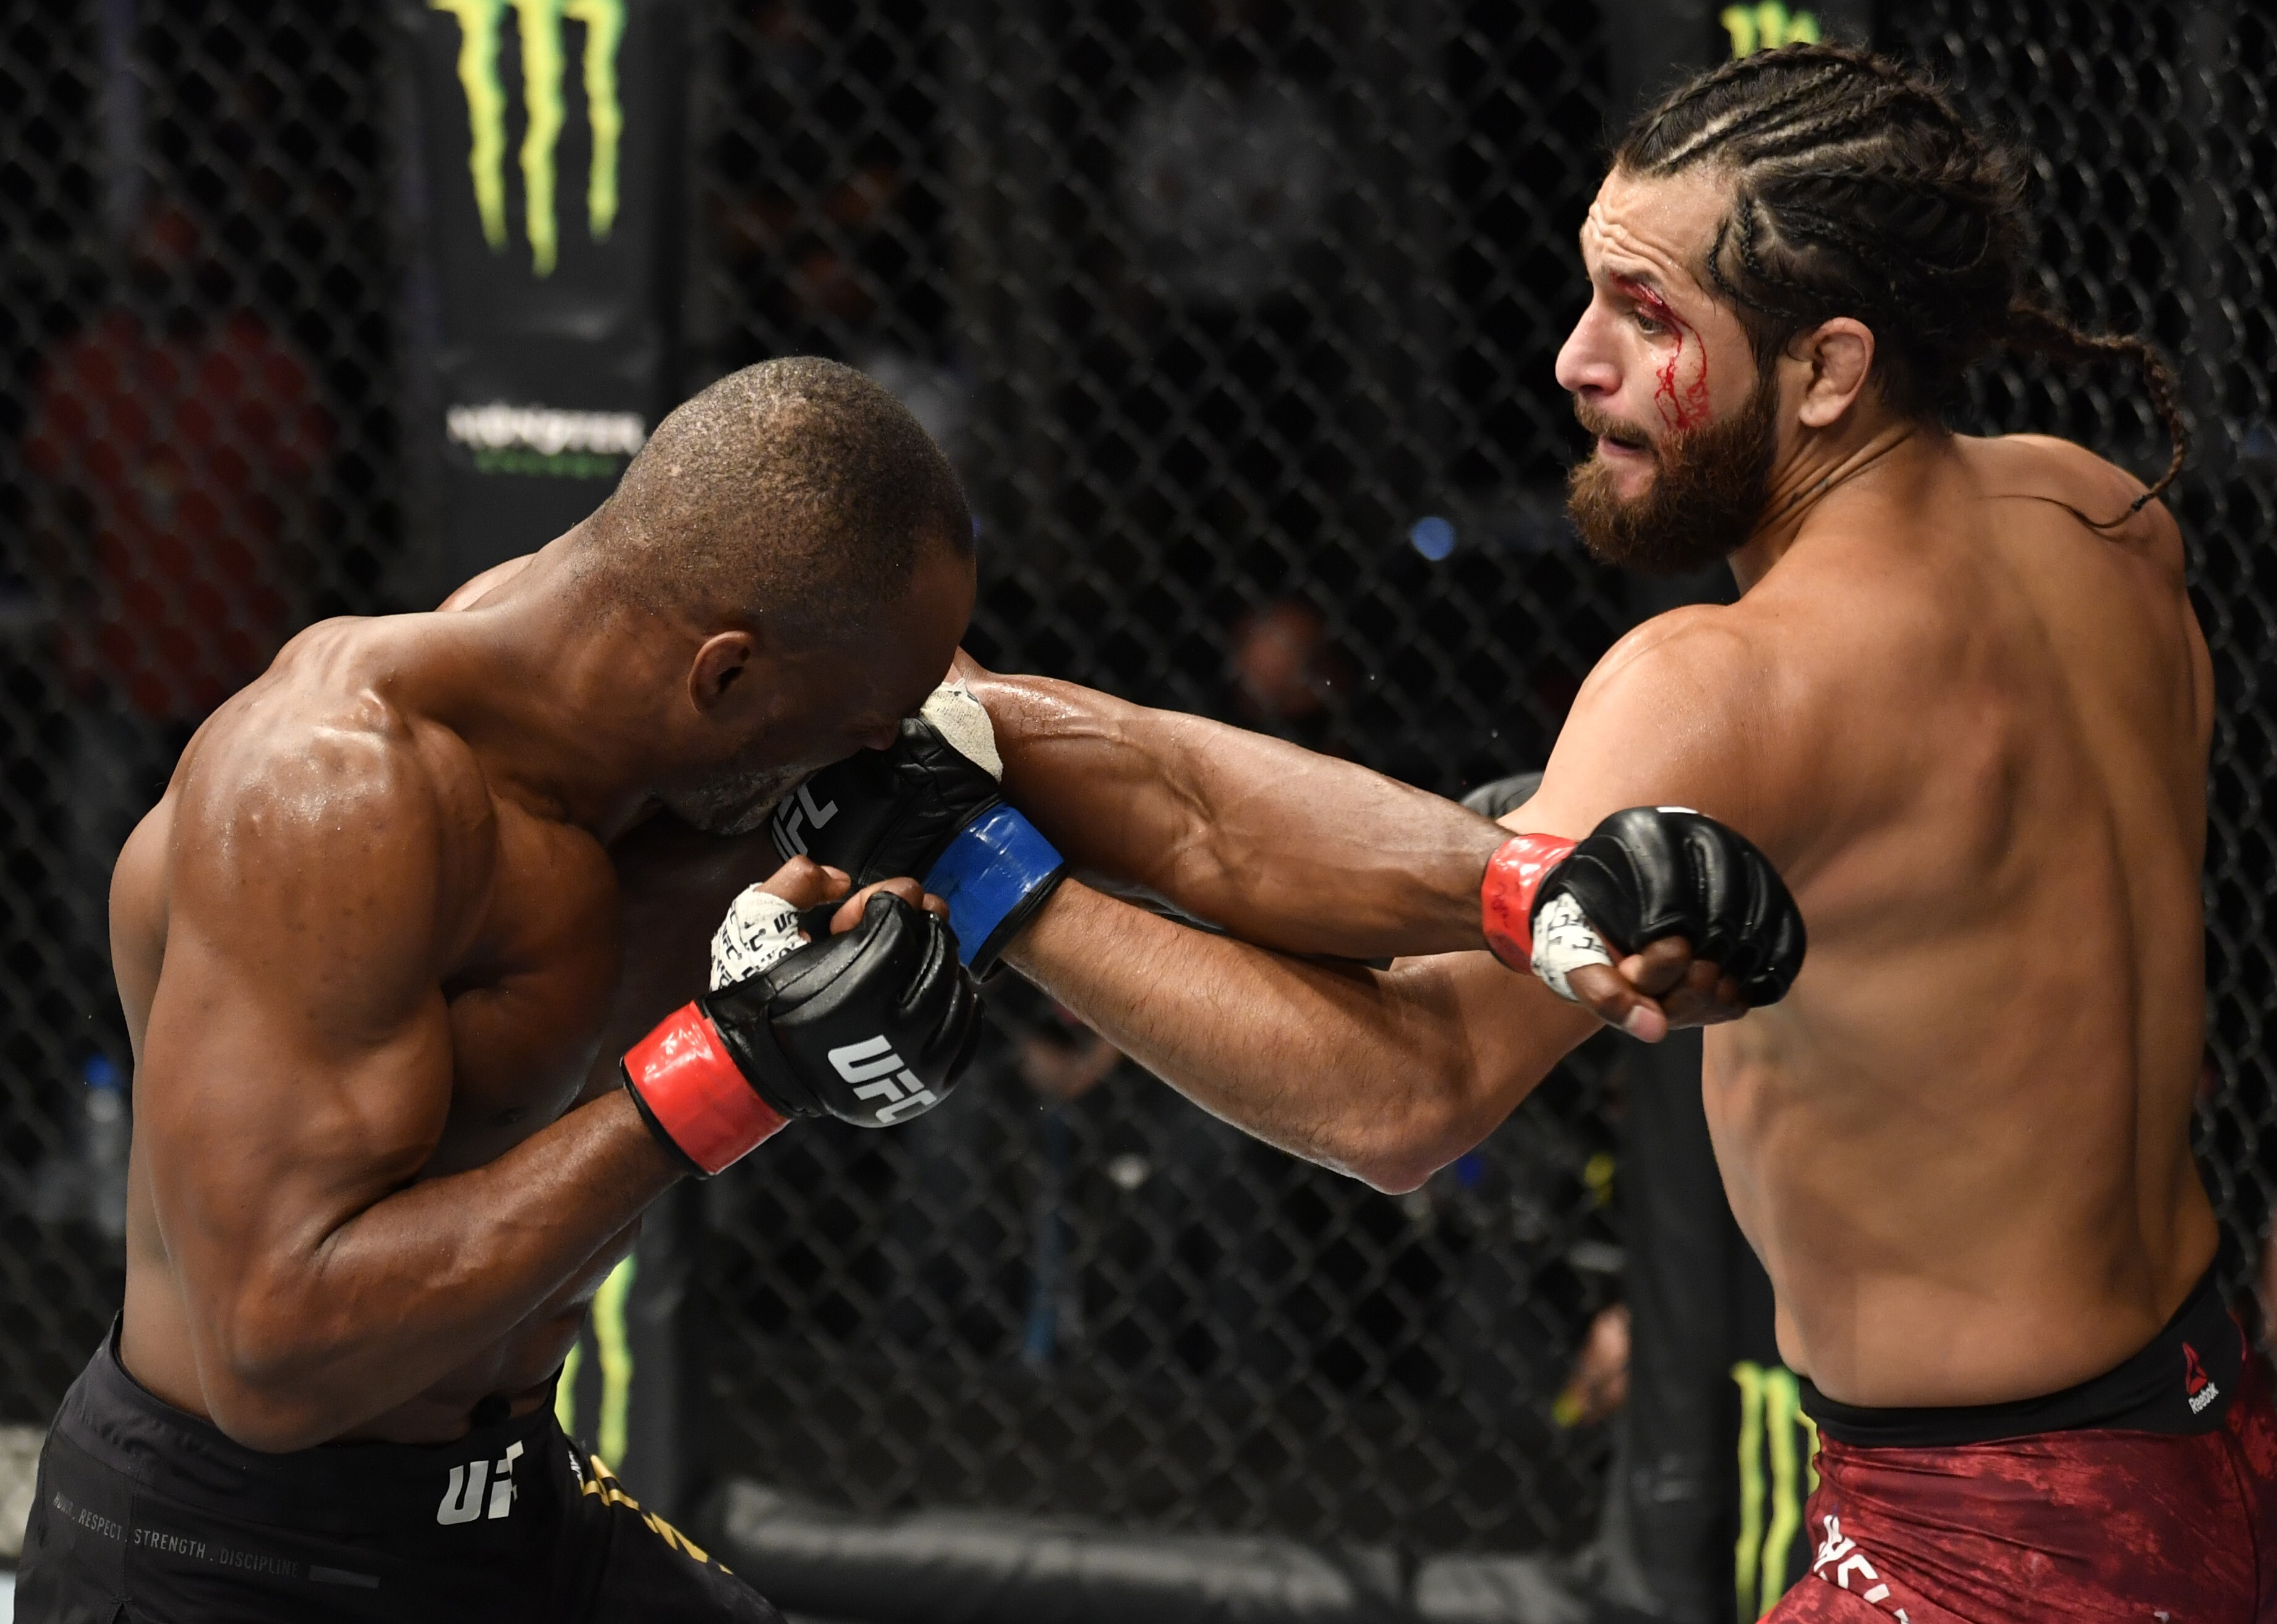 Jorge Masvidal punches Kamaru Usman in their welterweight championship fight during UFC 251. Photo: USA TODAY Sports